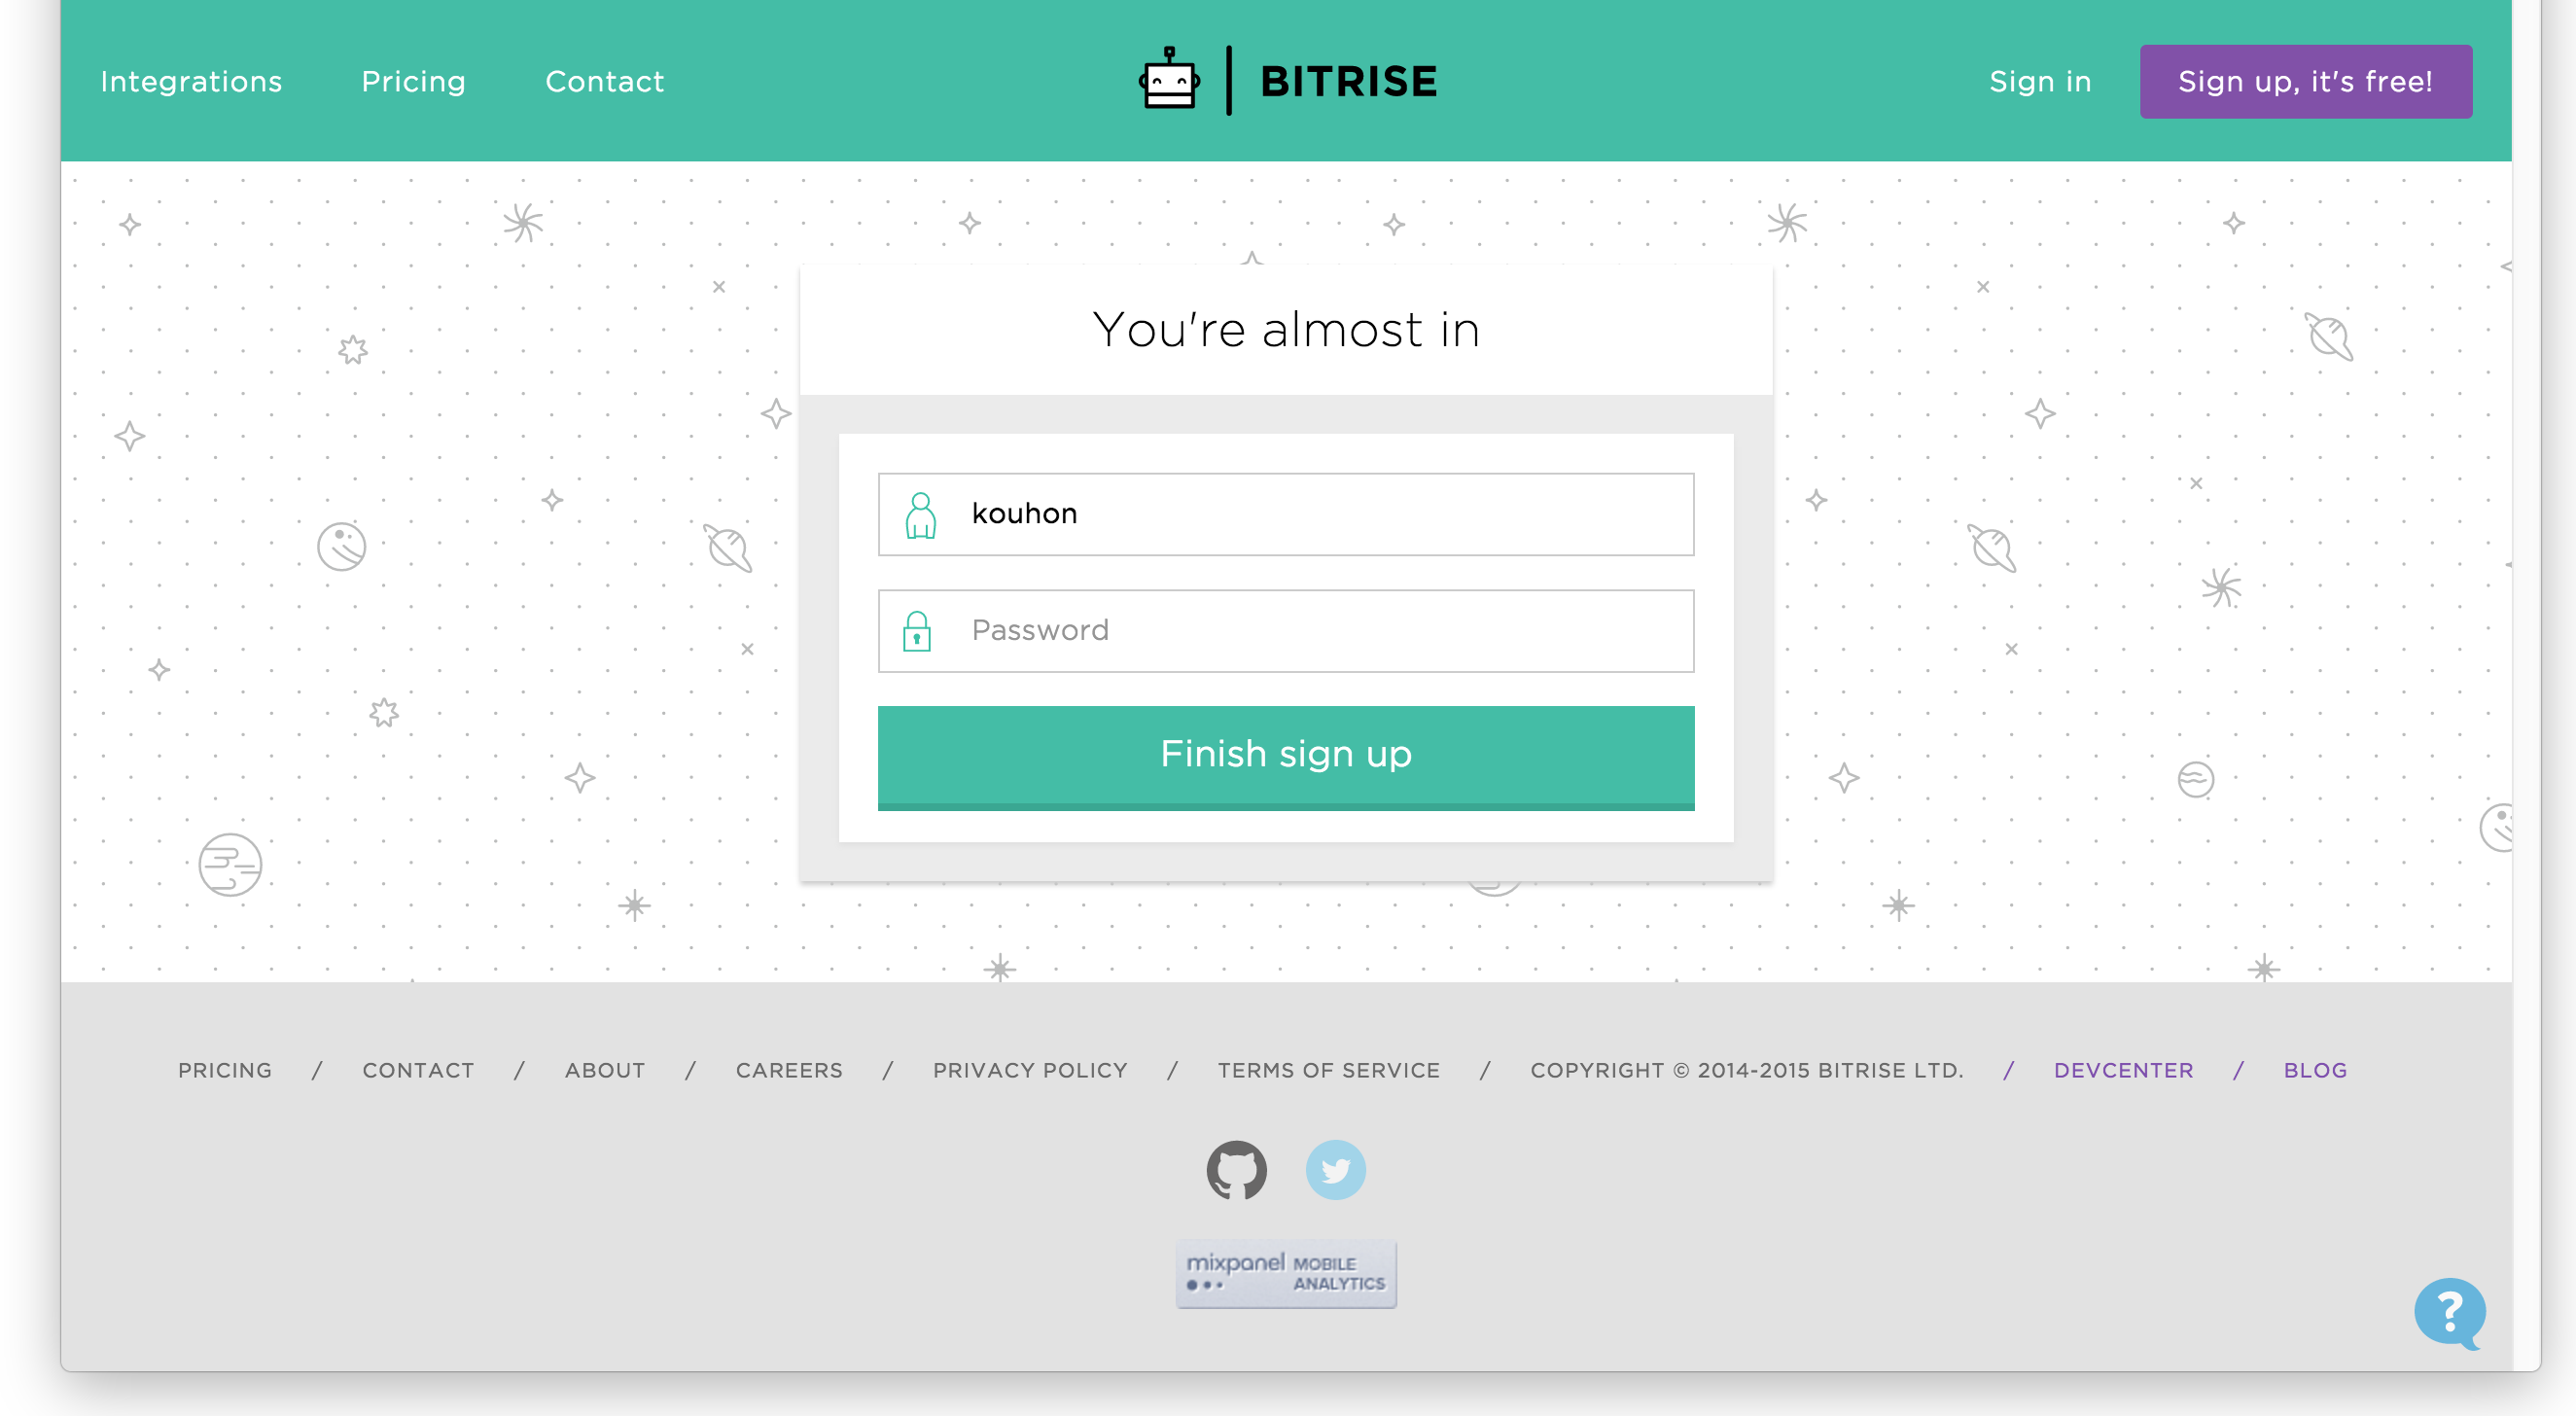 bitrise-sign-up-almost-in.png